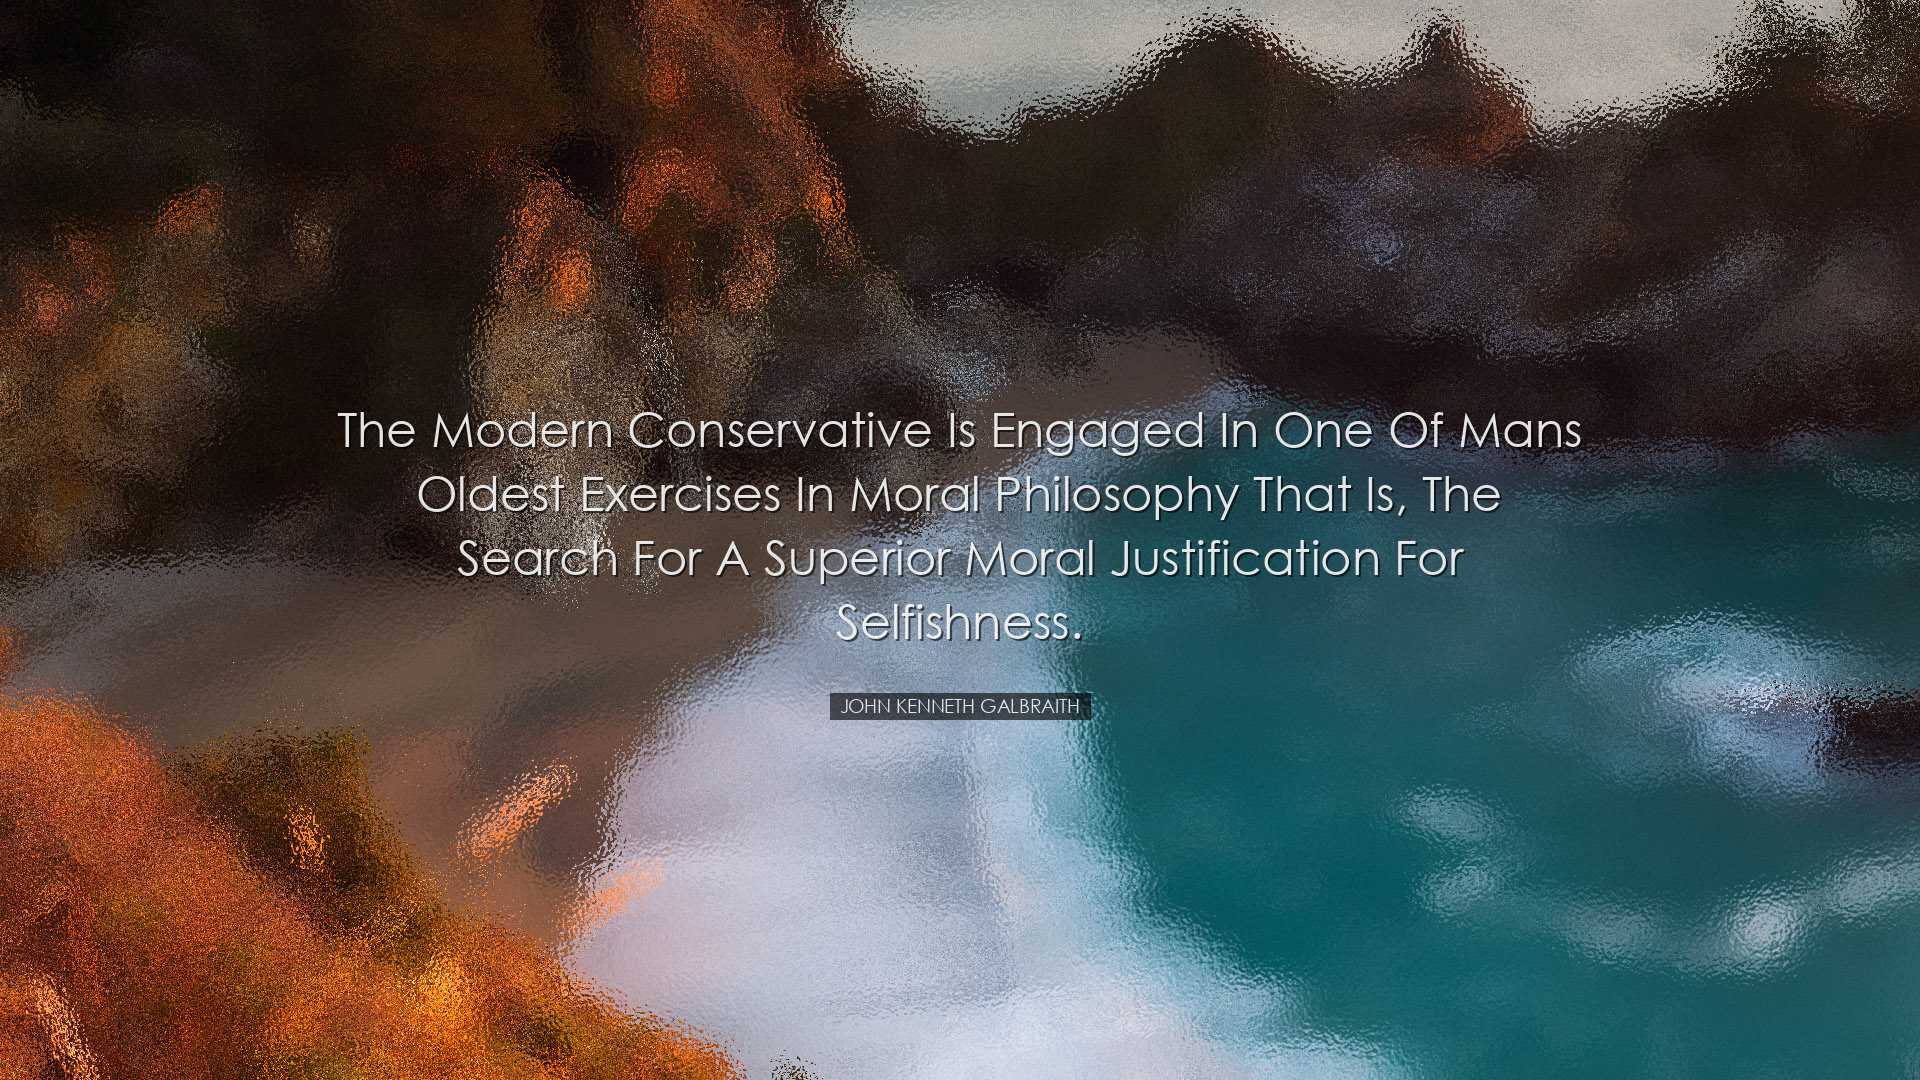 The modern conservative is engaged in one of mans oldest exercises